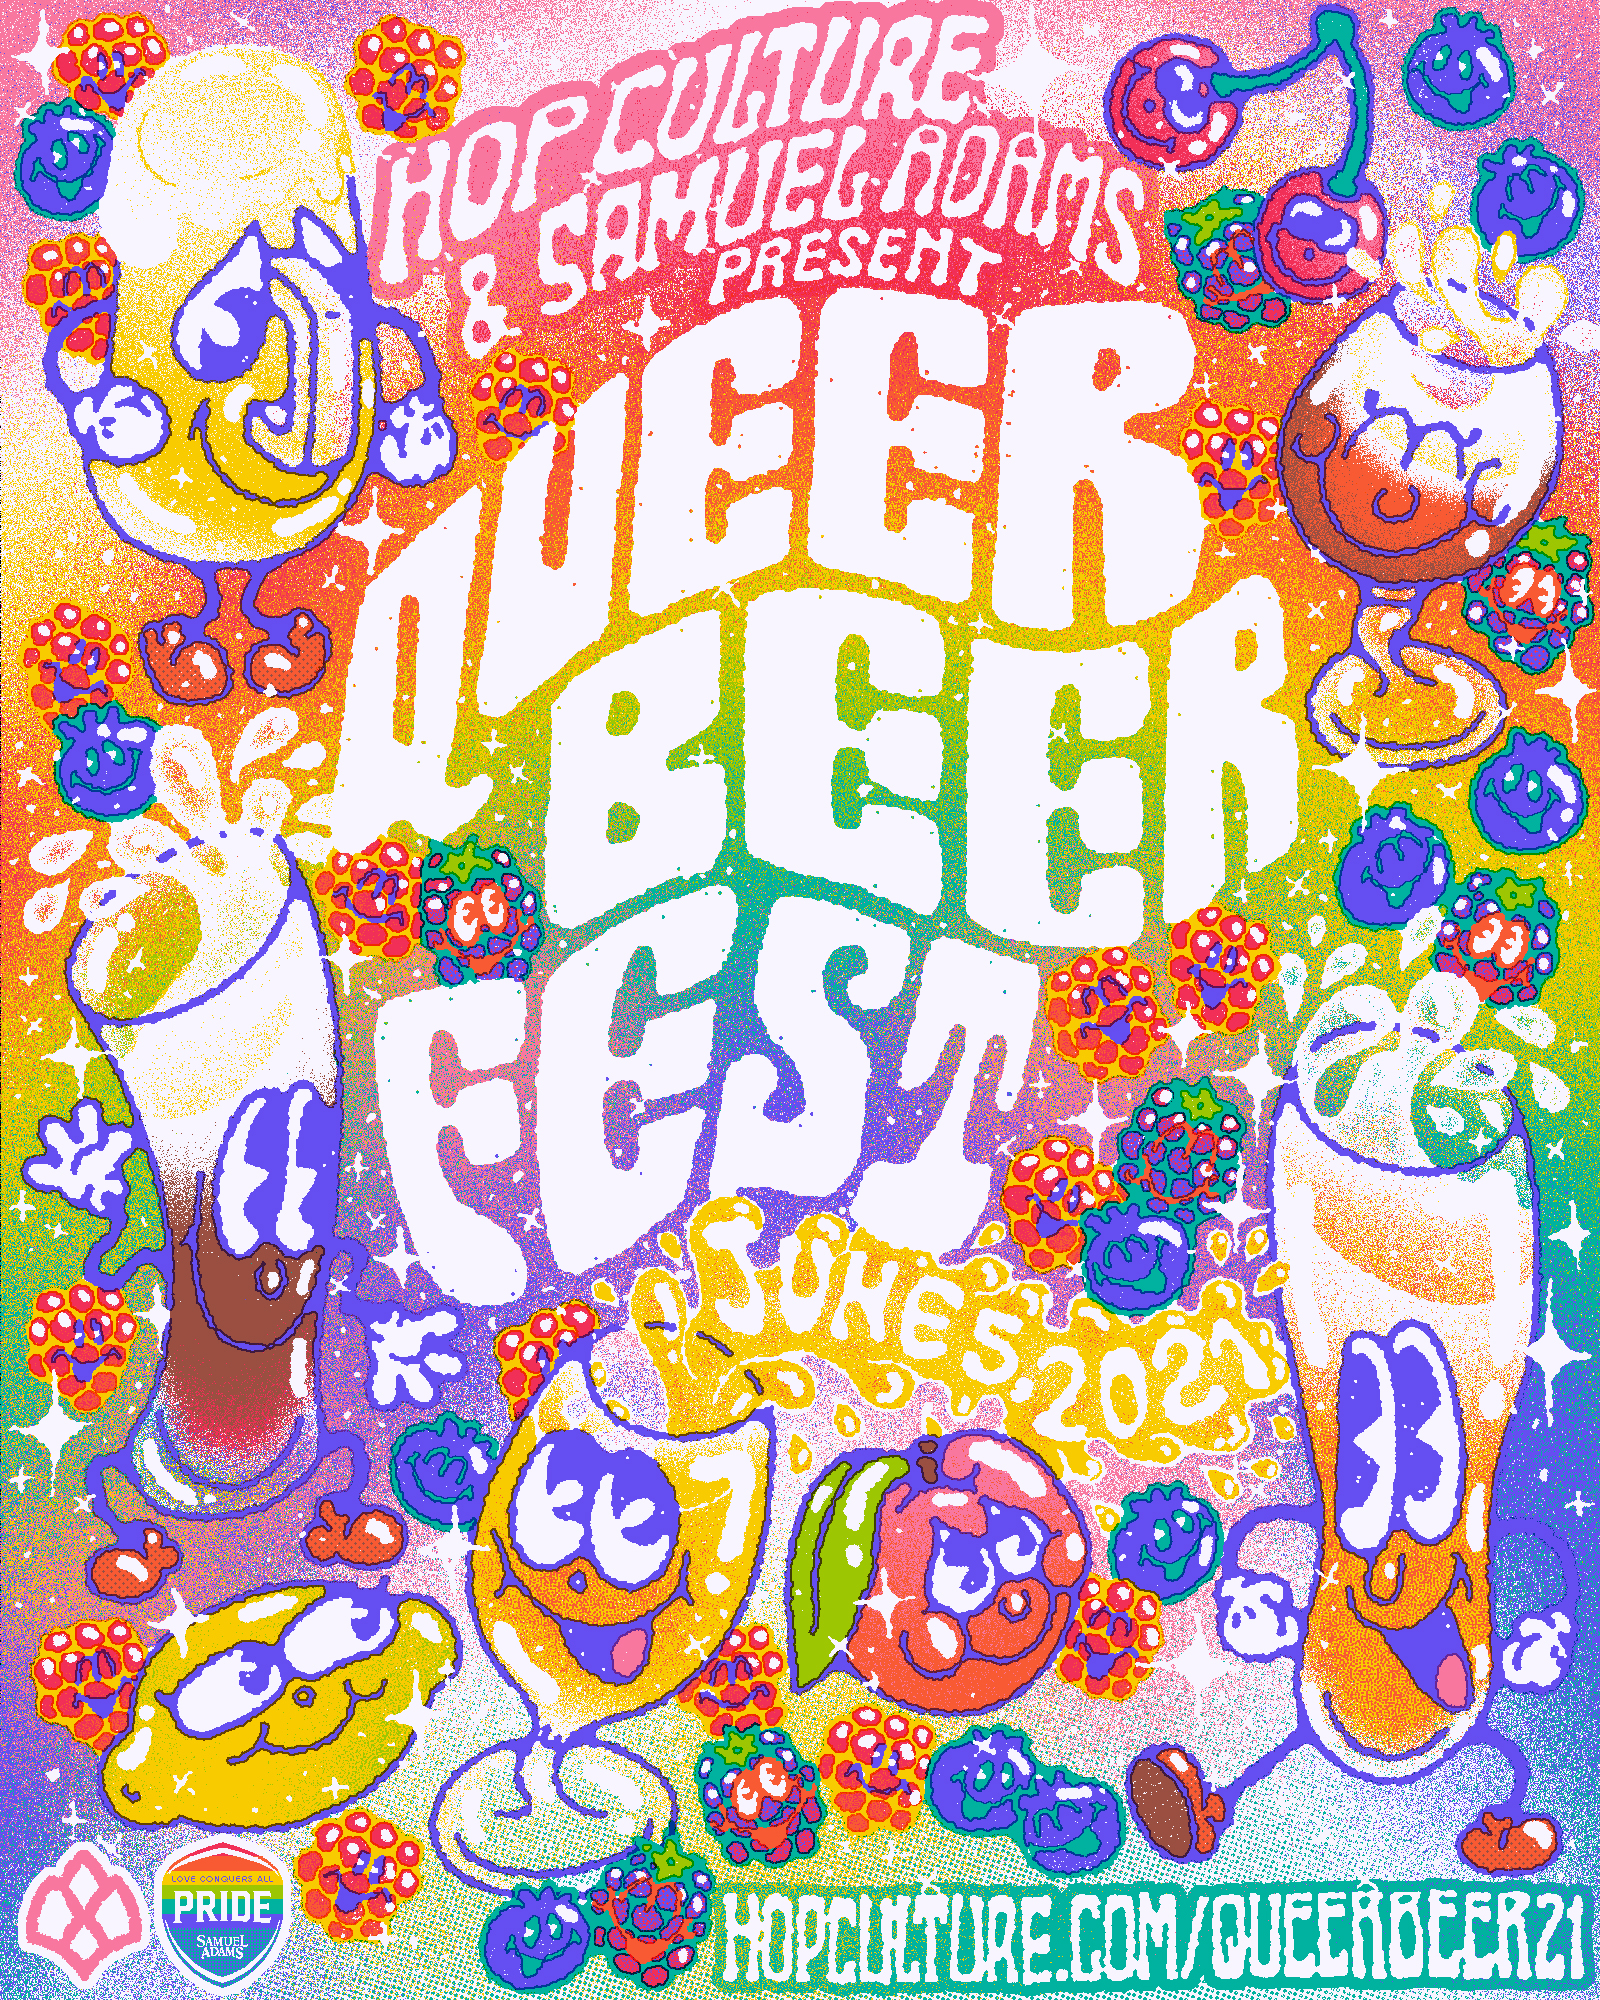 Check Out the Schedule for Queer Beer